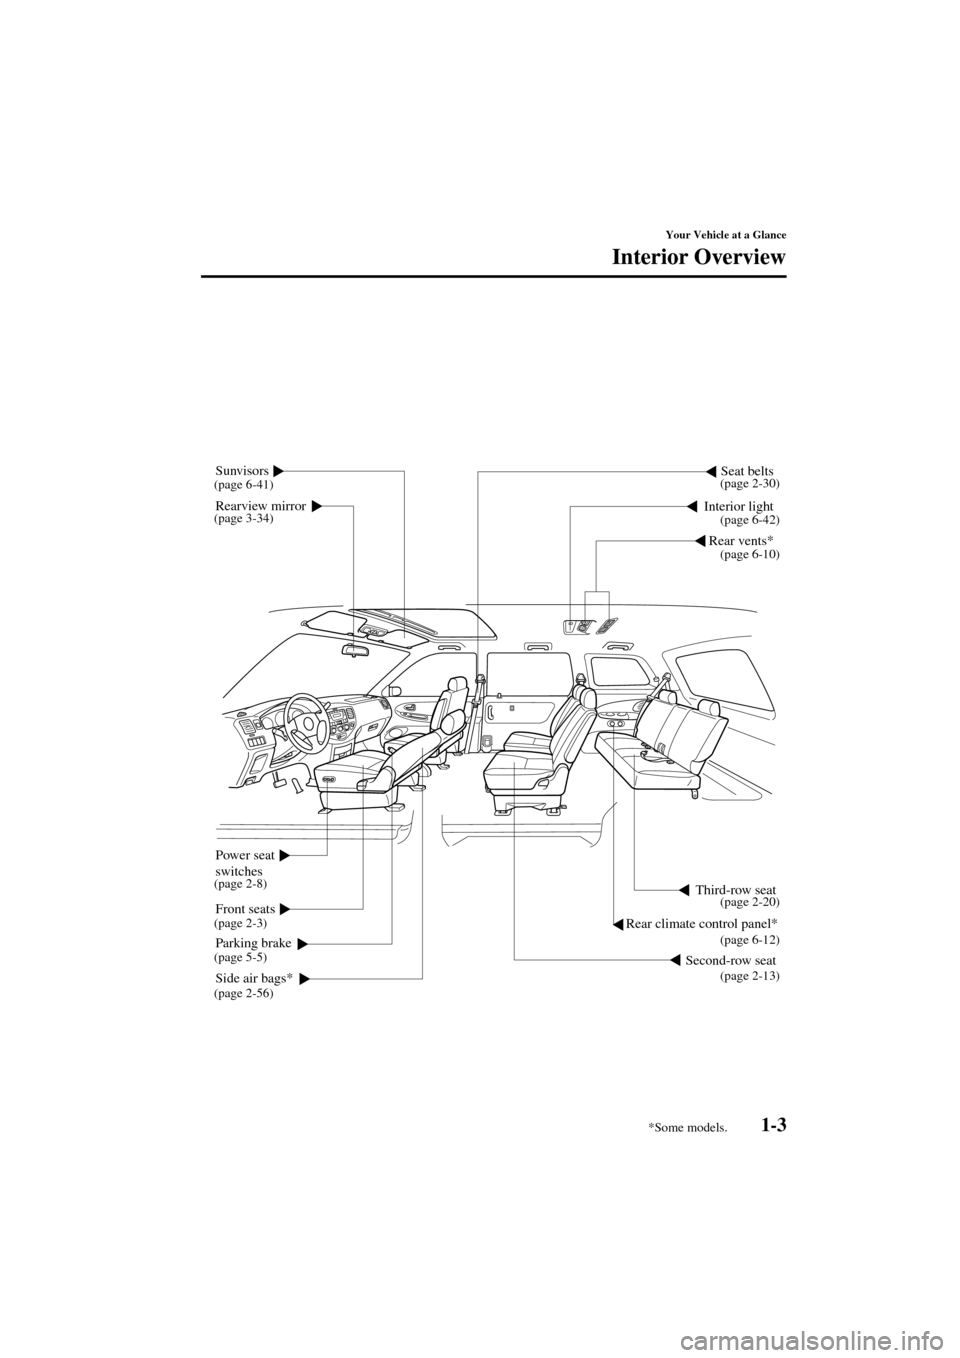 MAZDA MODEL MPV 2004  Owners Manual (in English) 1-3
Your Vehicle at a Glance
Form No. 8S06-EA-03H
Interior Overview
Rearview mirrorSeat beltsInterior light
Sunvisors
Front seats
Side air bags*
Second-row seat
Power seat 
switches
Third-row seat
Par